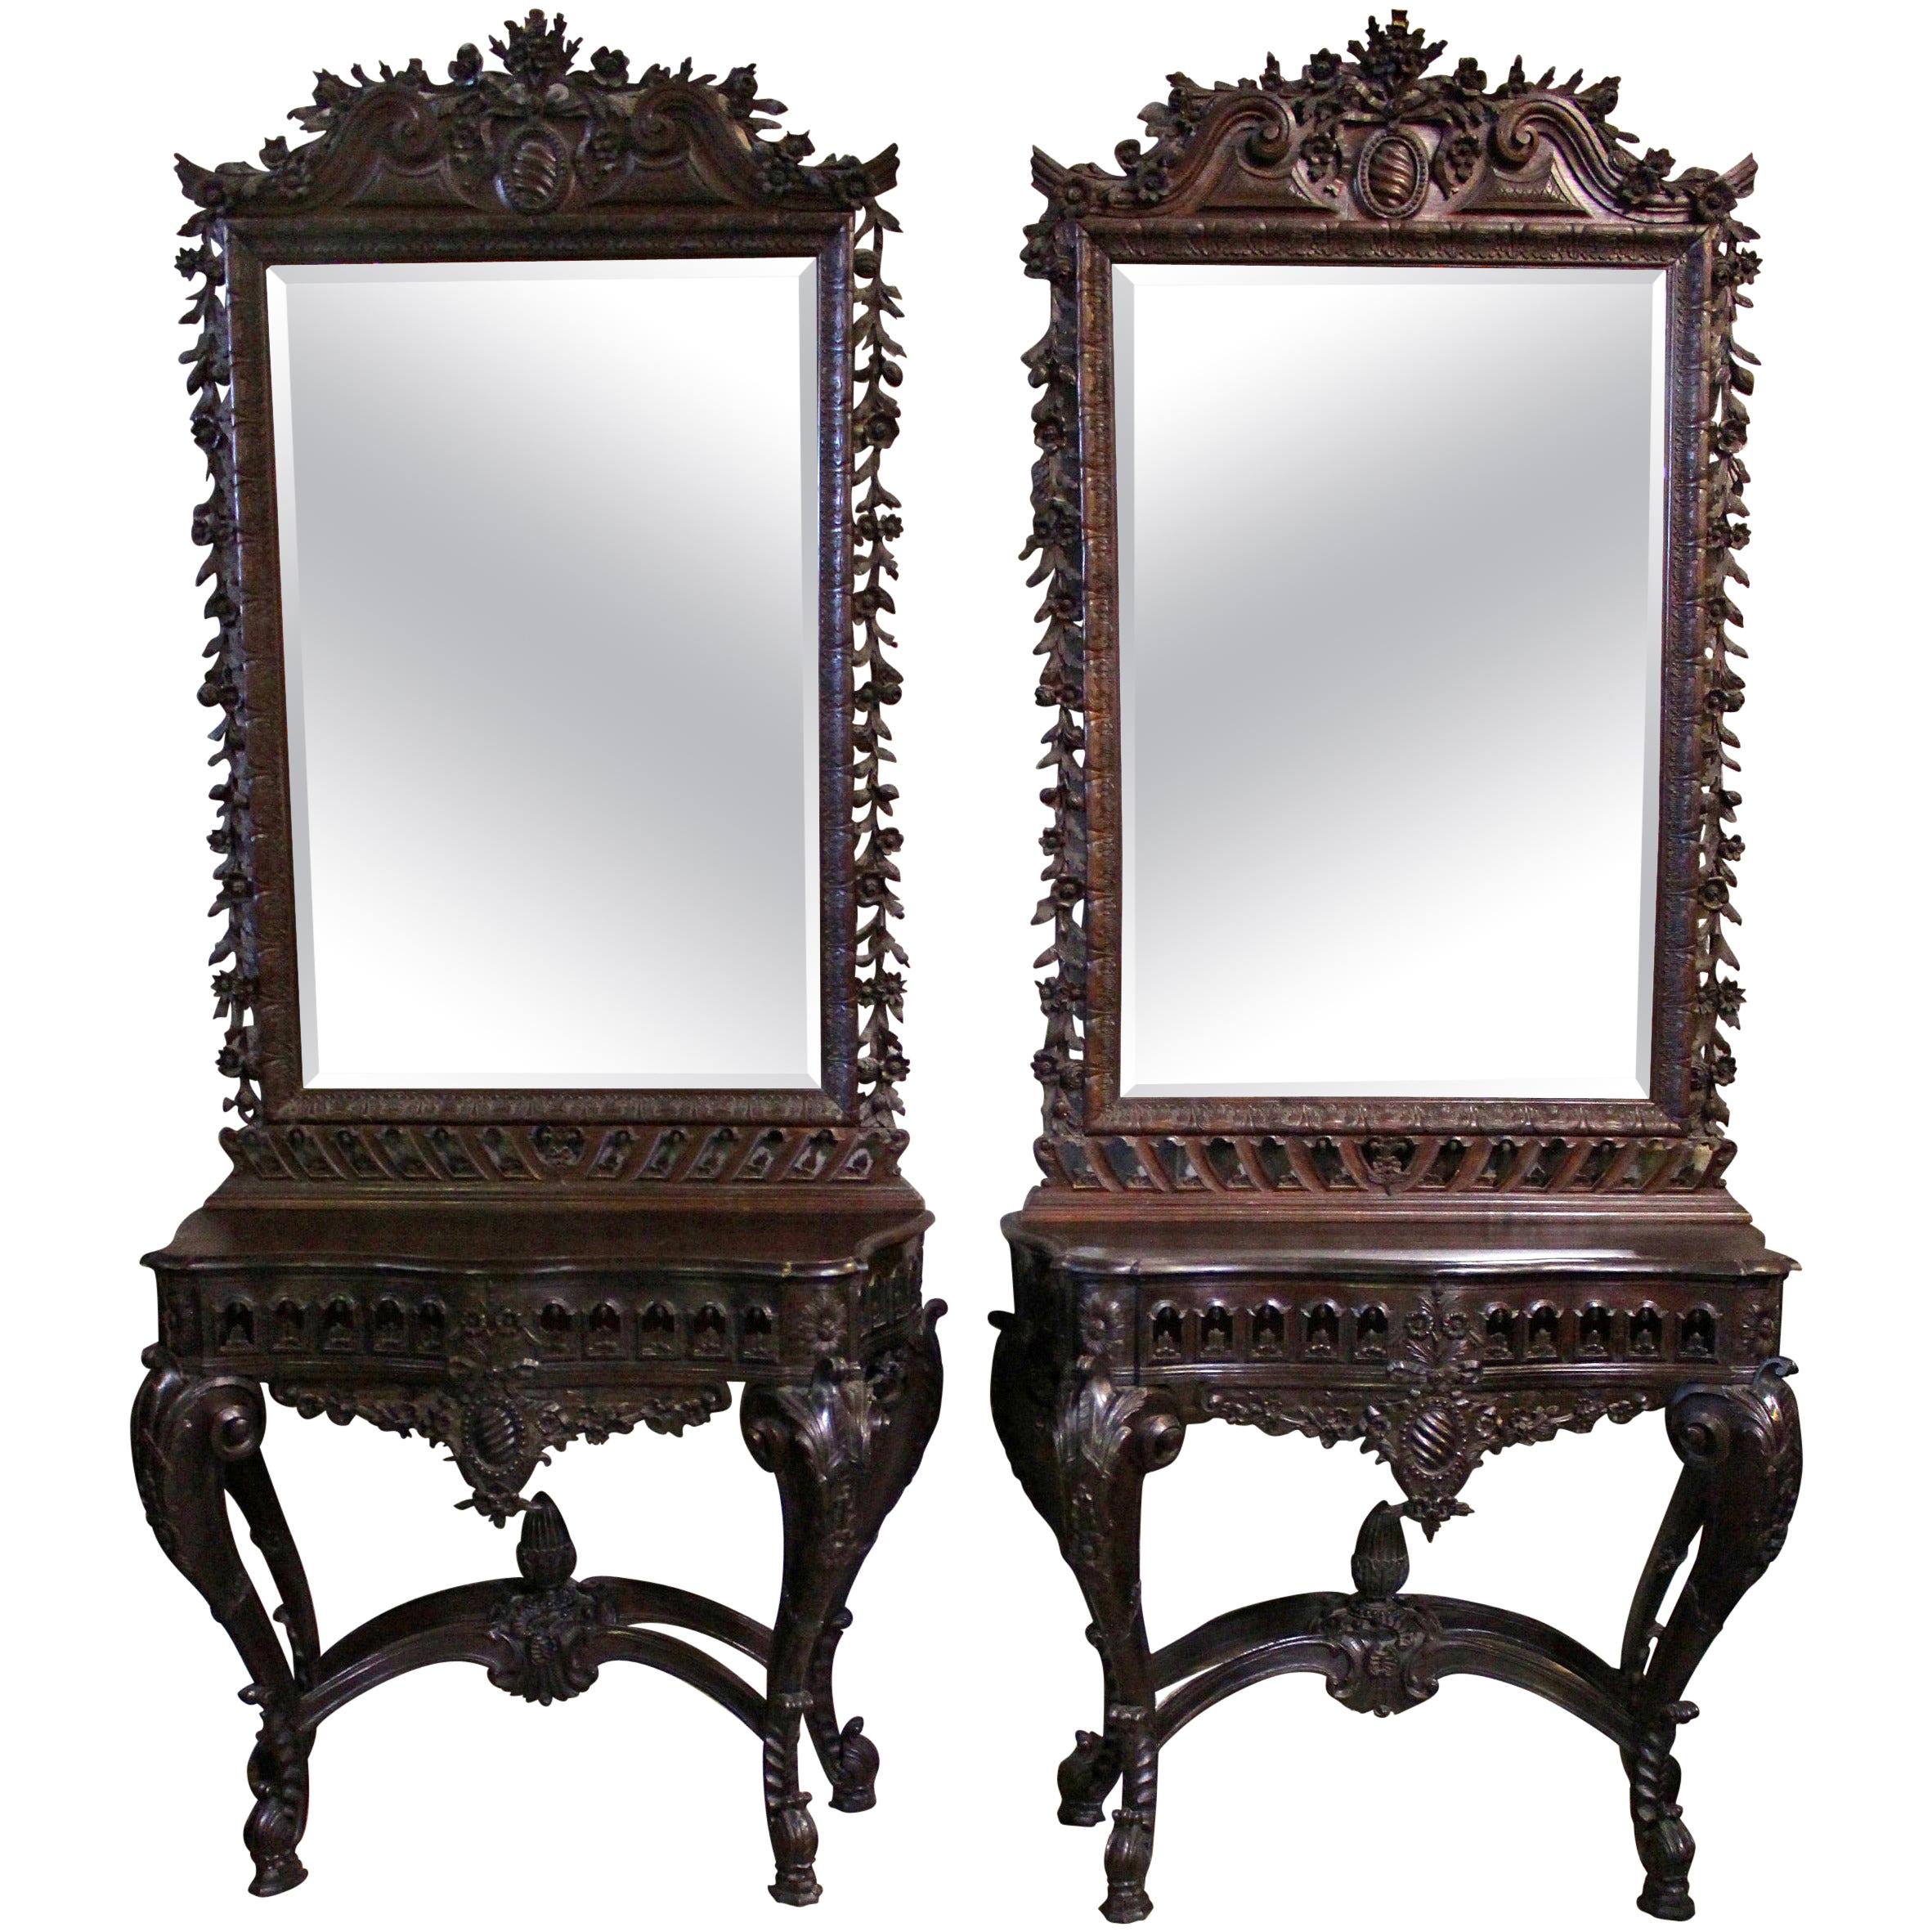 19th Century Pair of Portuguese Rococo Style Console Tables and Mirrors For Sale